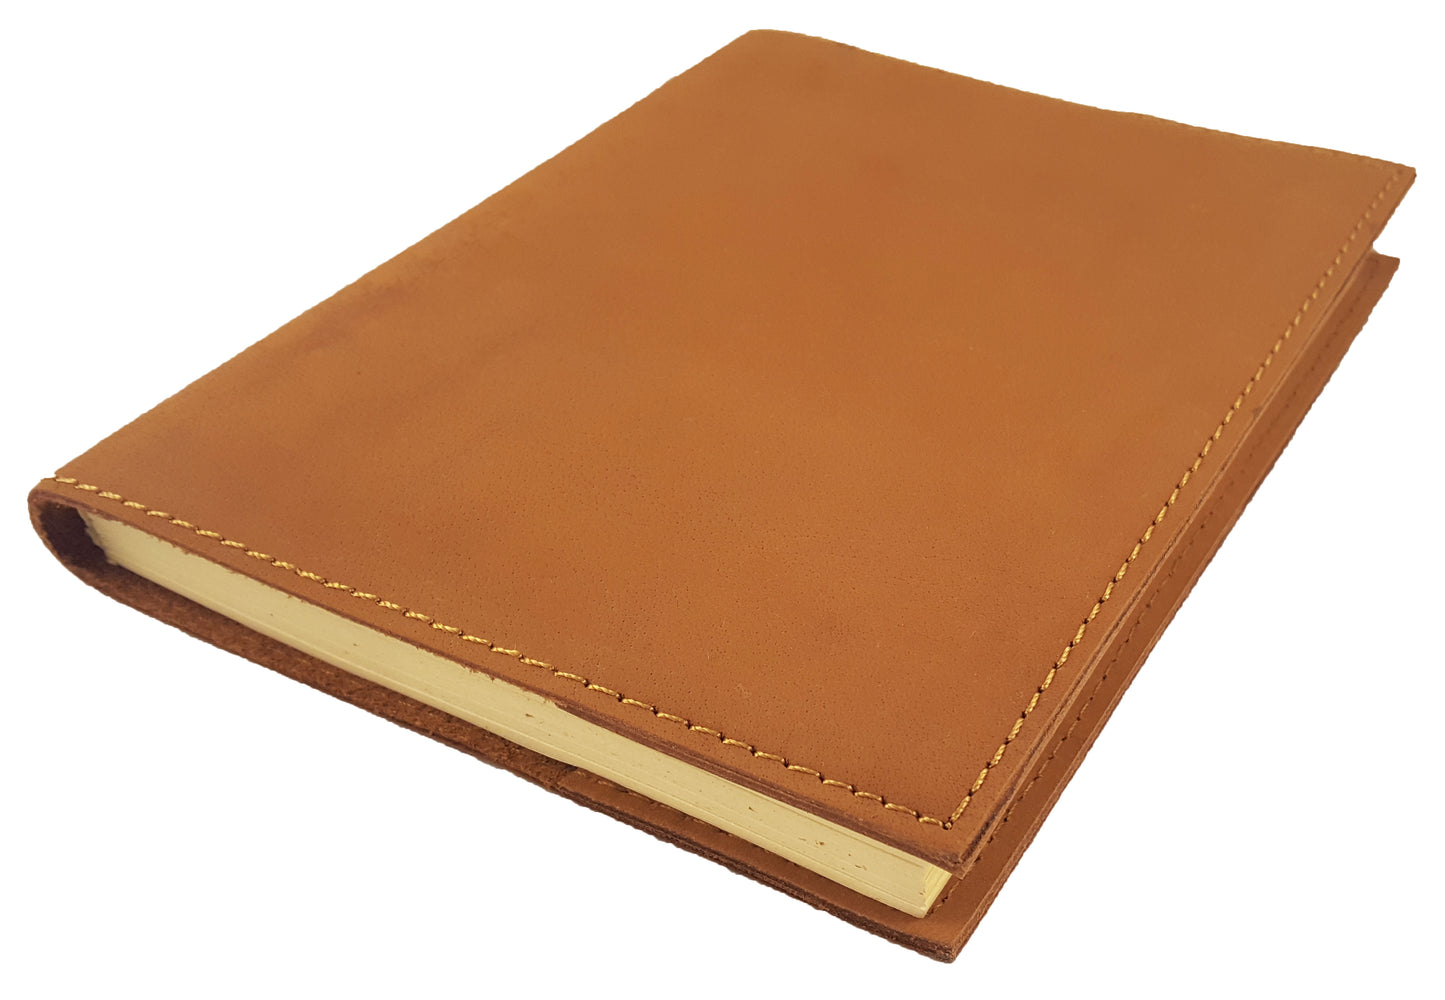 Rustic Refillable Leather Journal / Sketchbook with Handmade Paper - 6x8" - Rustic Ridge Leather